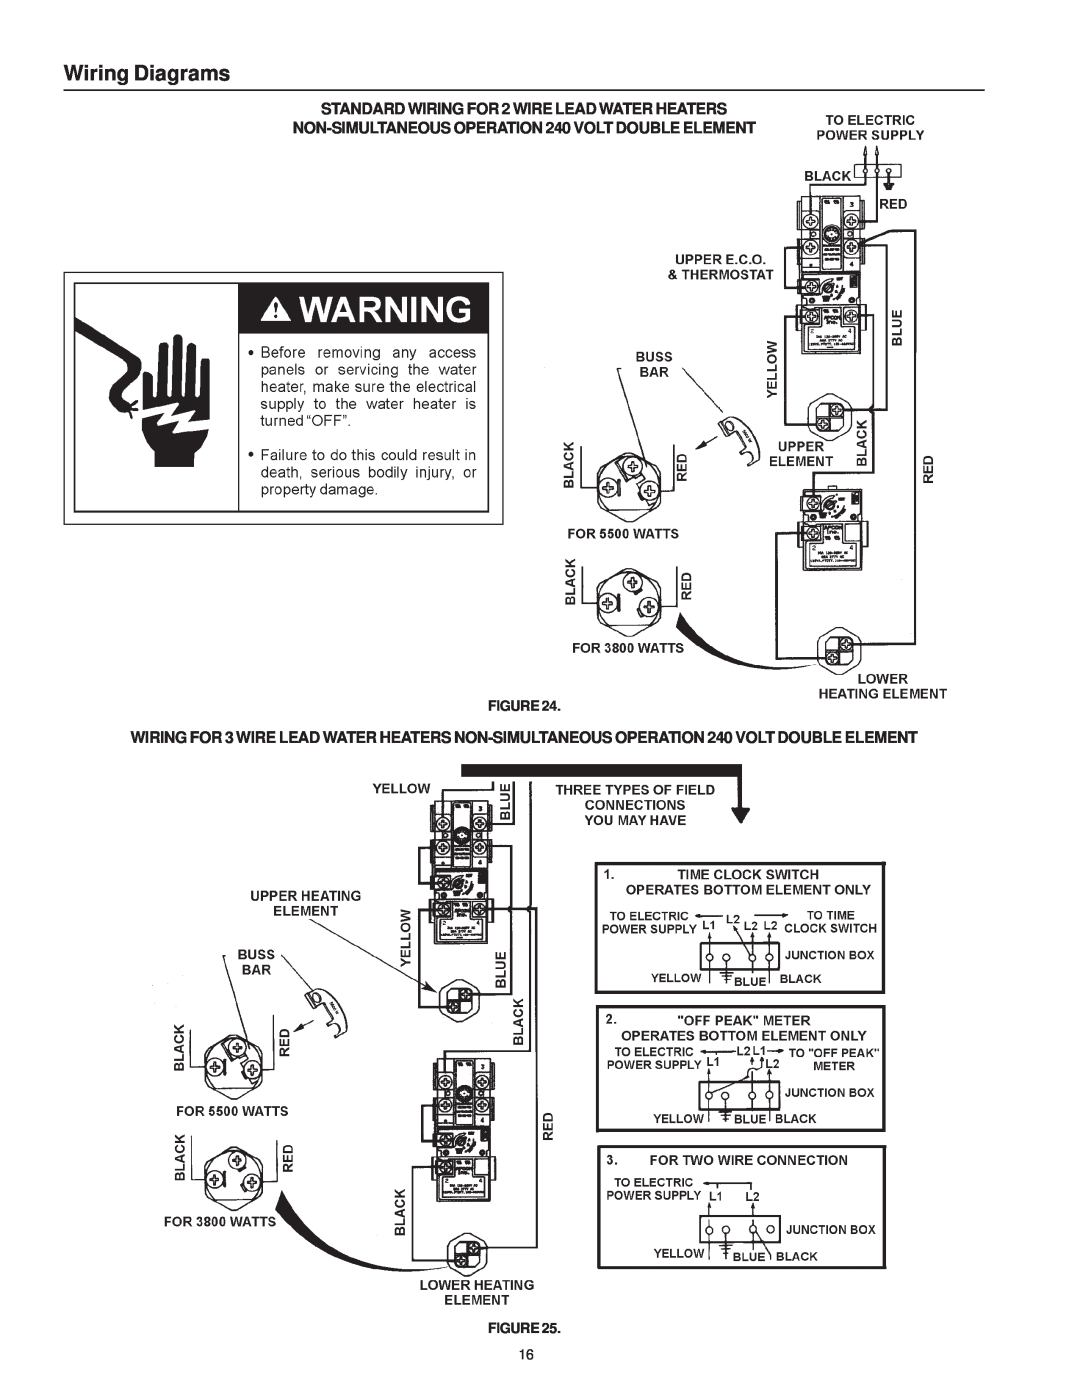 Maytag HRE11240S, HRE41282T, HRE41250S, HRE41250T, HRE41240S Wiring Diagrams, STANDARD WIRING FOR 2 WIRE LEAD WATER HEATERS 